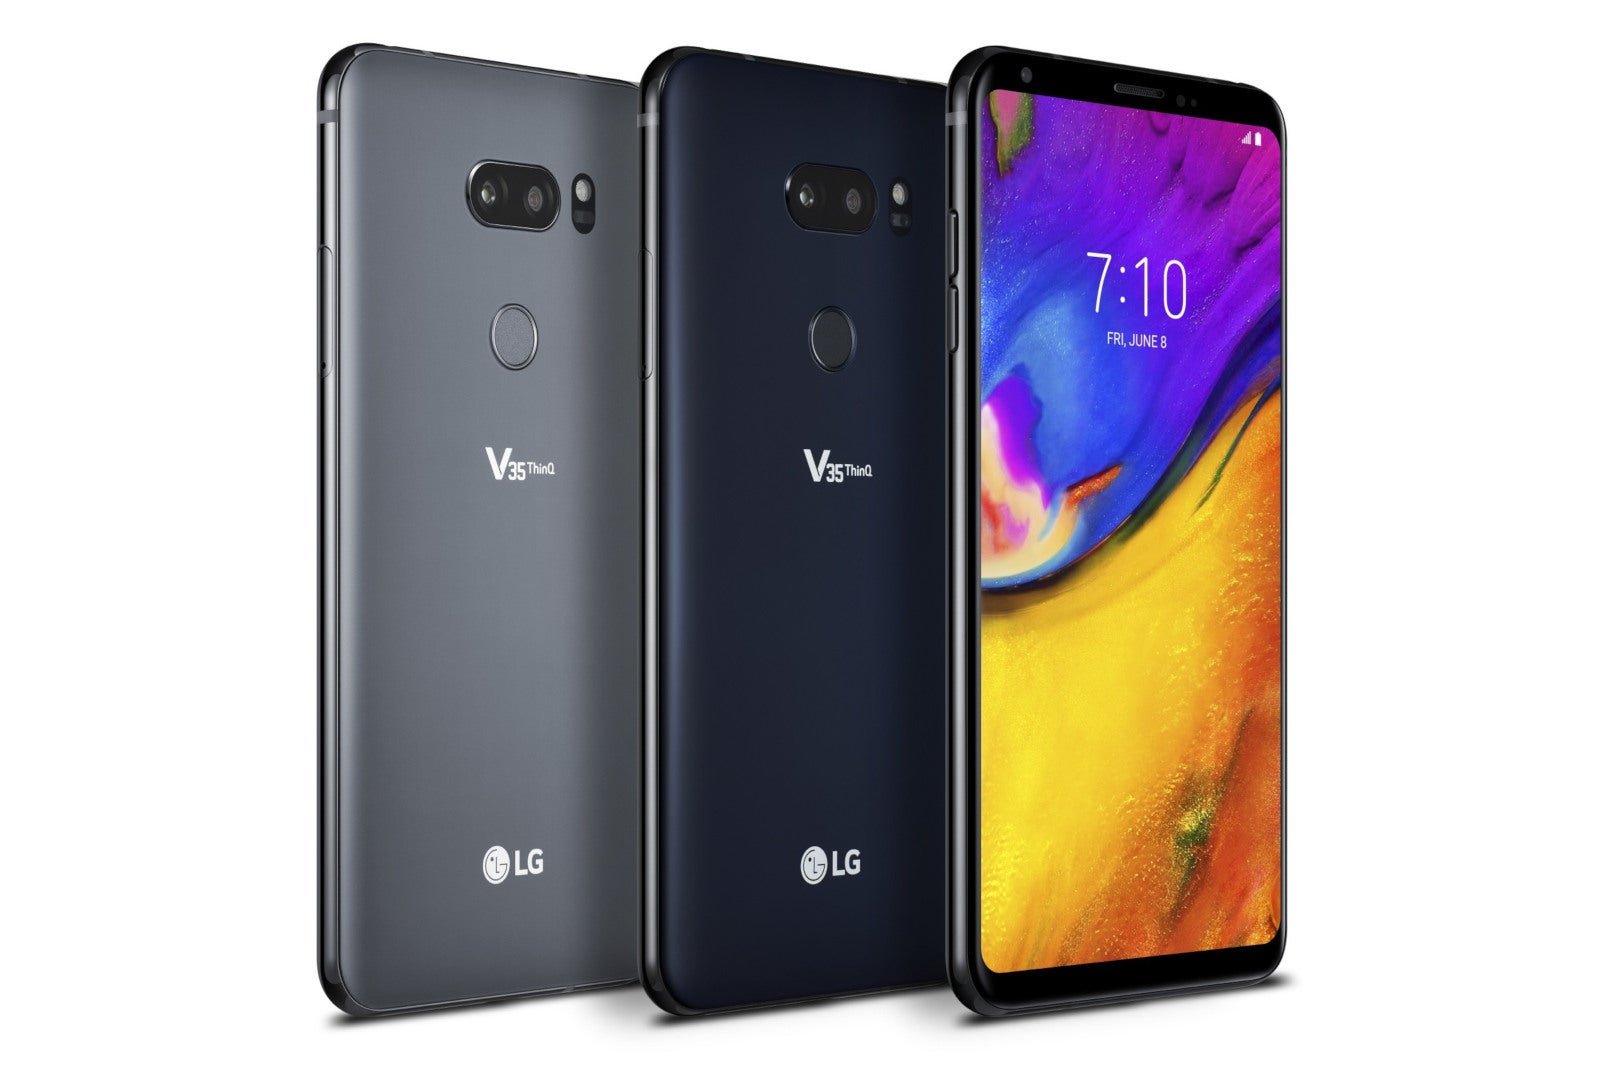 LG V35 ThinQ is official, comes with Snapdragon 845 and a promising new camera